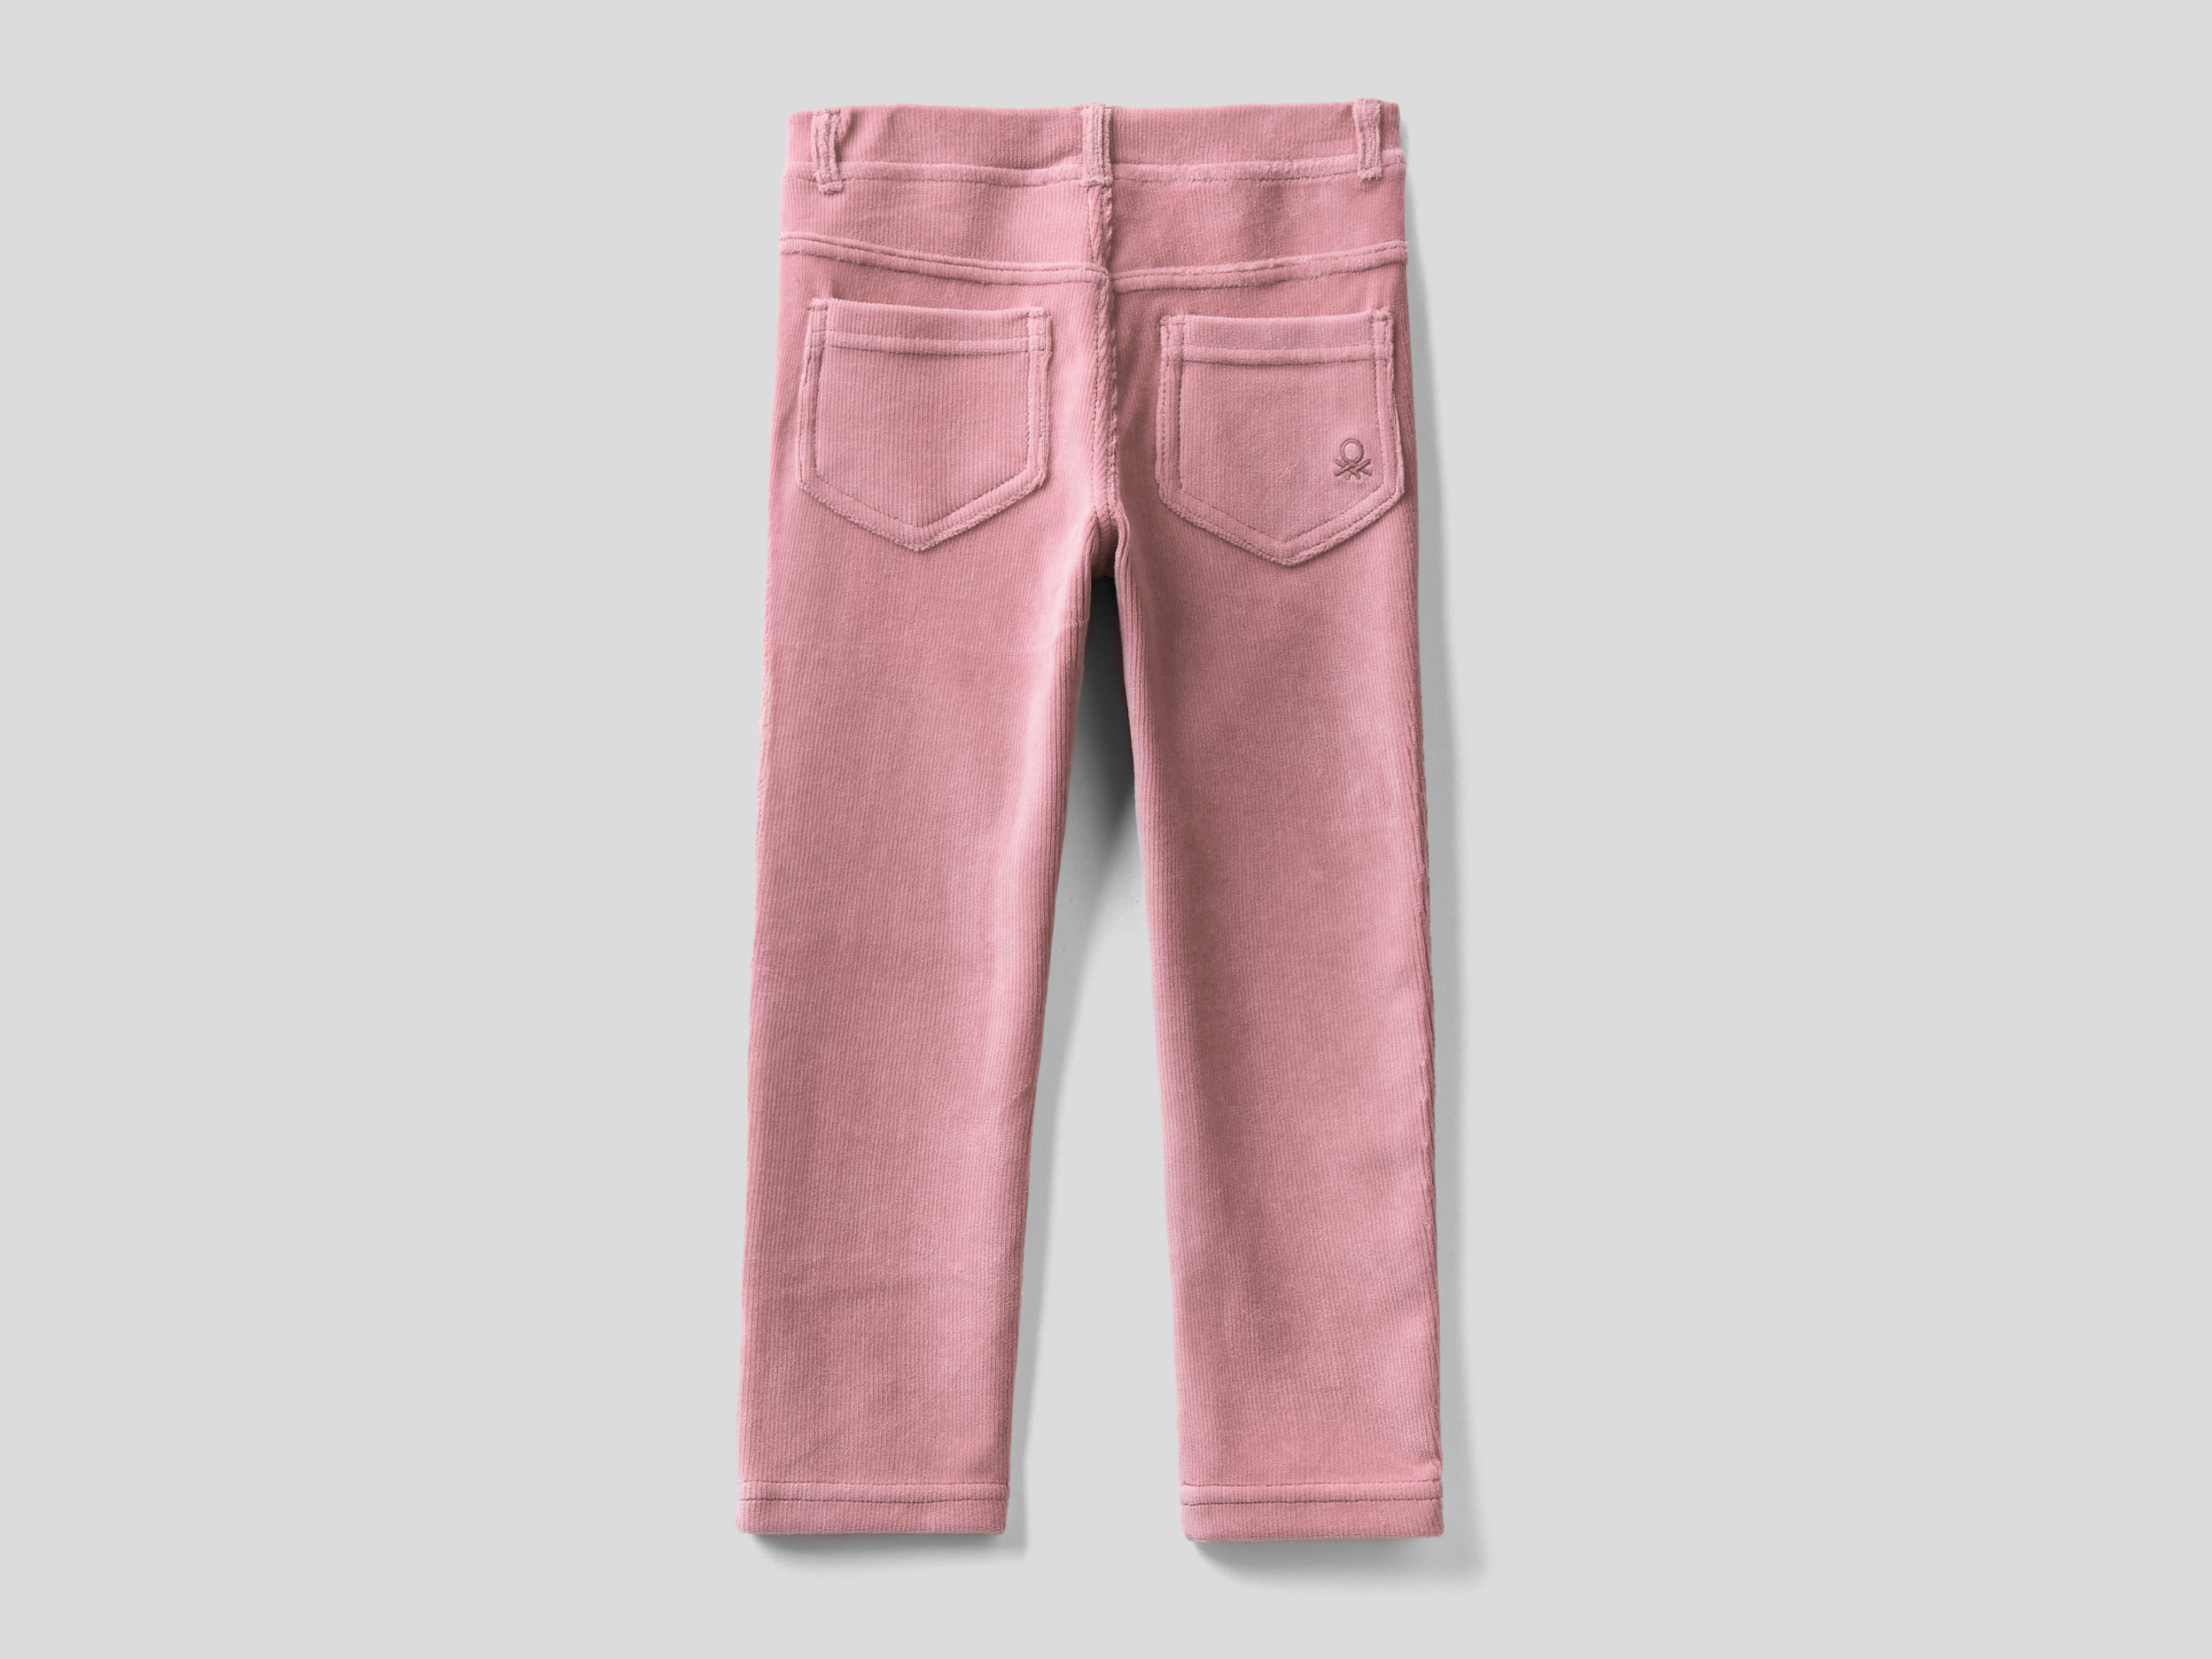 Benetton, Ribbed Chenille Trousers, Taglia 12-18, Soft Pink, Kids